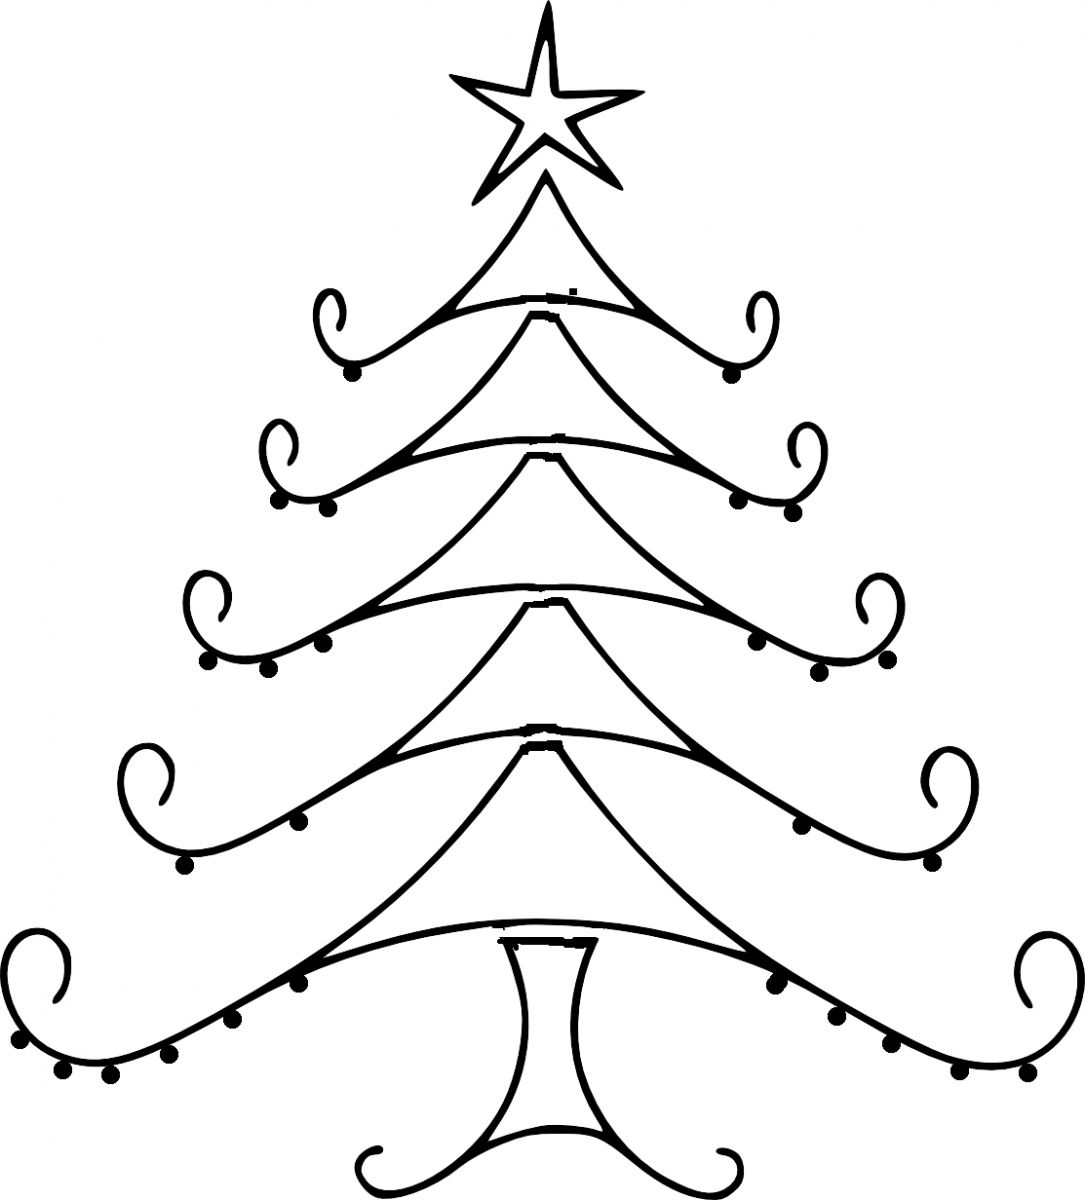 Christmas Tree Line Drawing - ClipArt Best - ClipArt Best